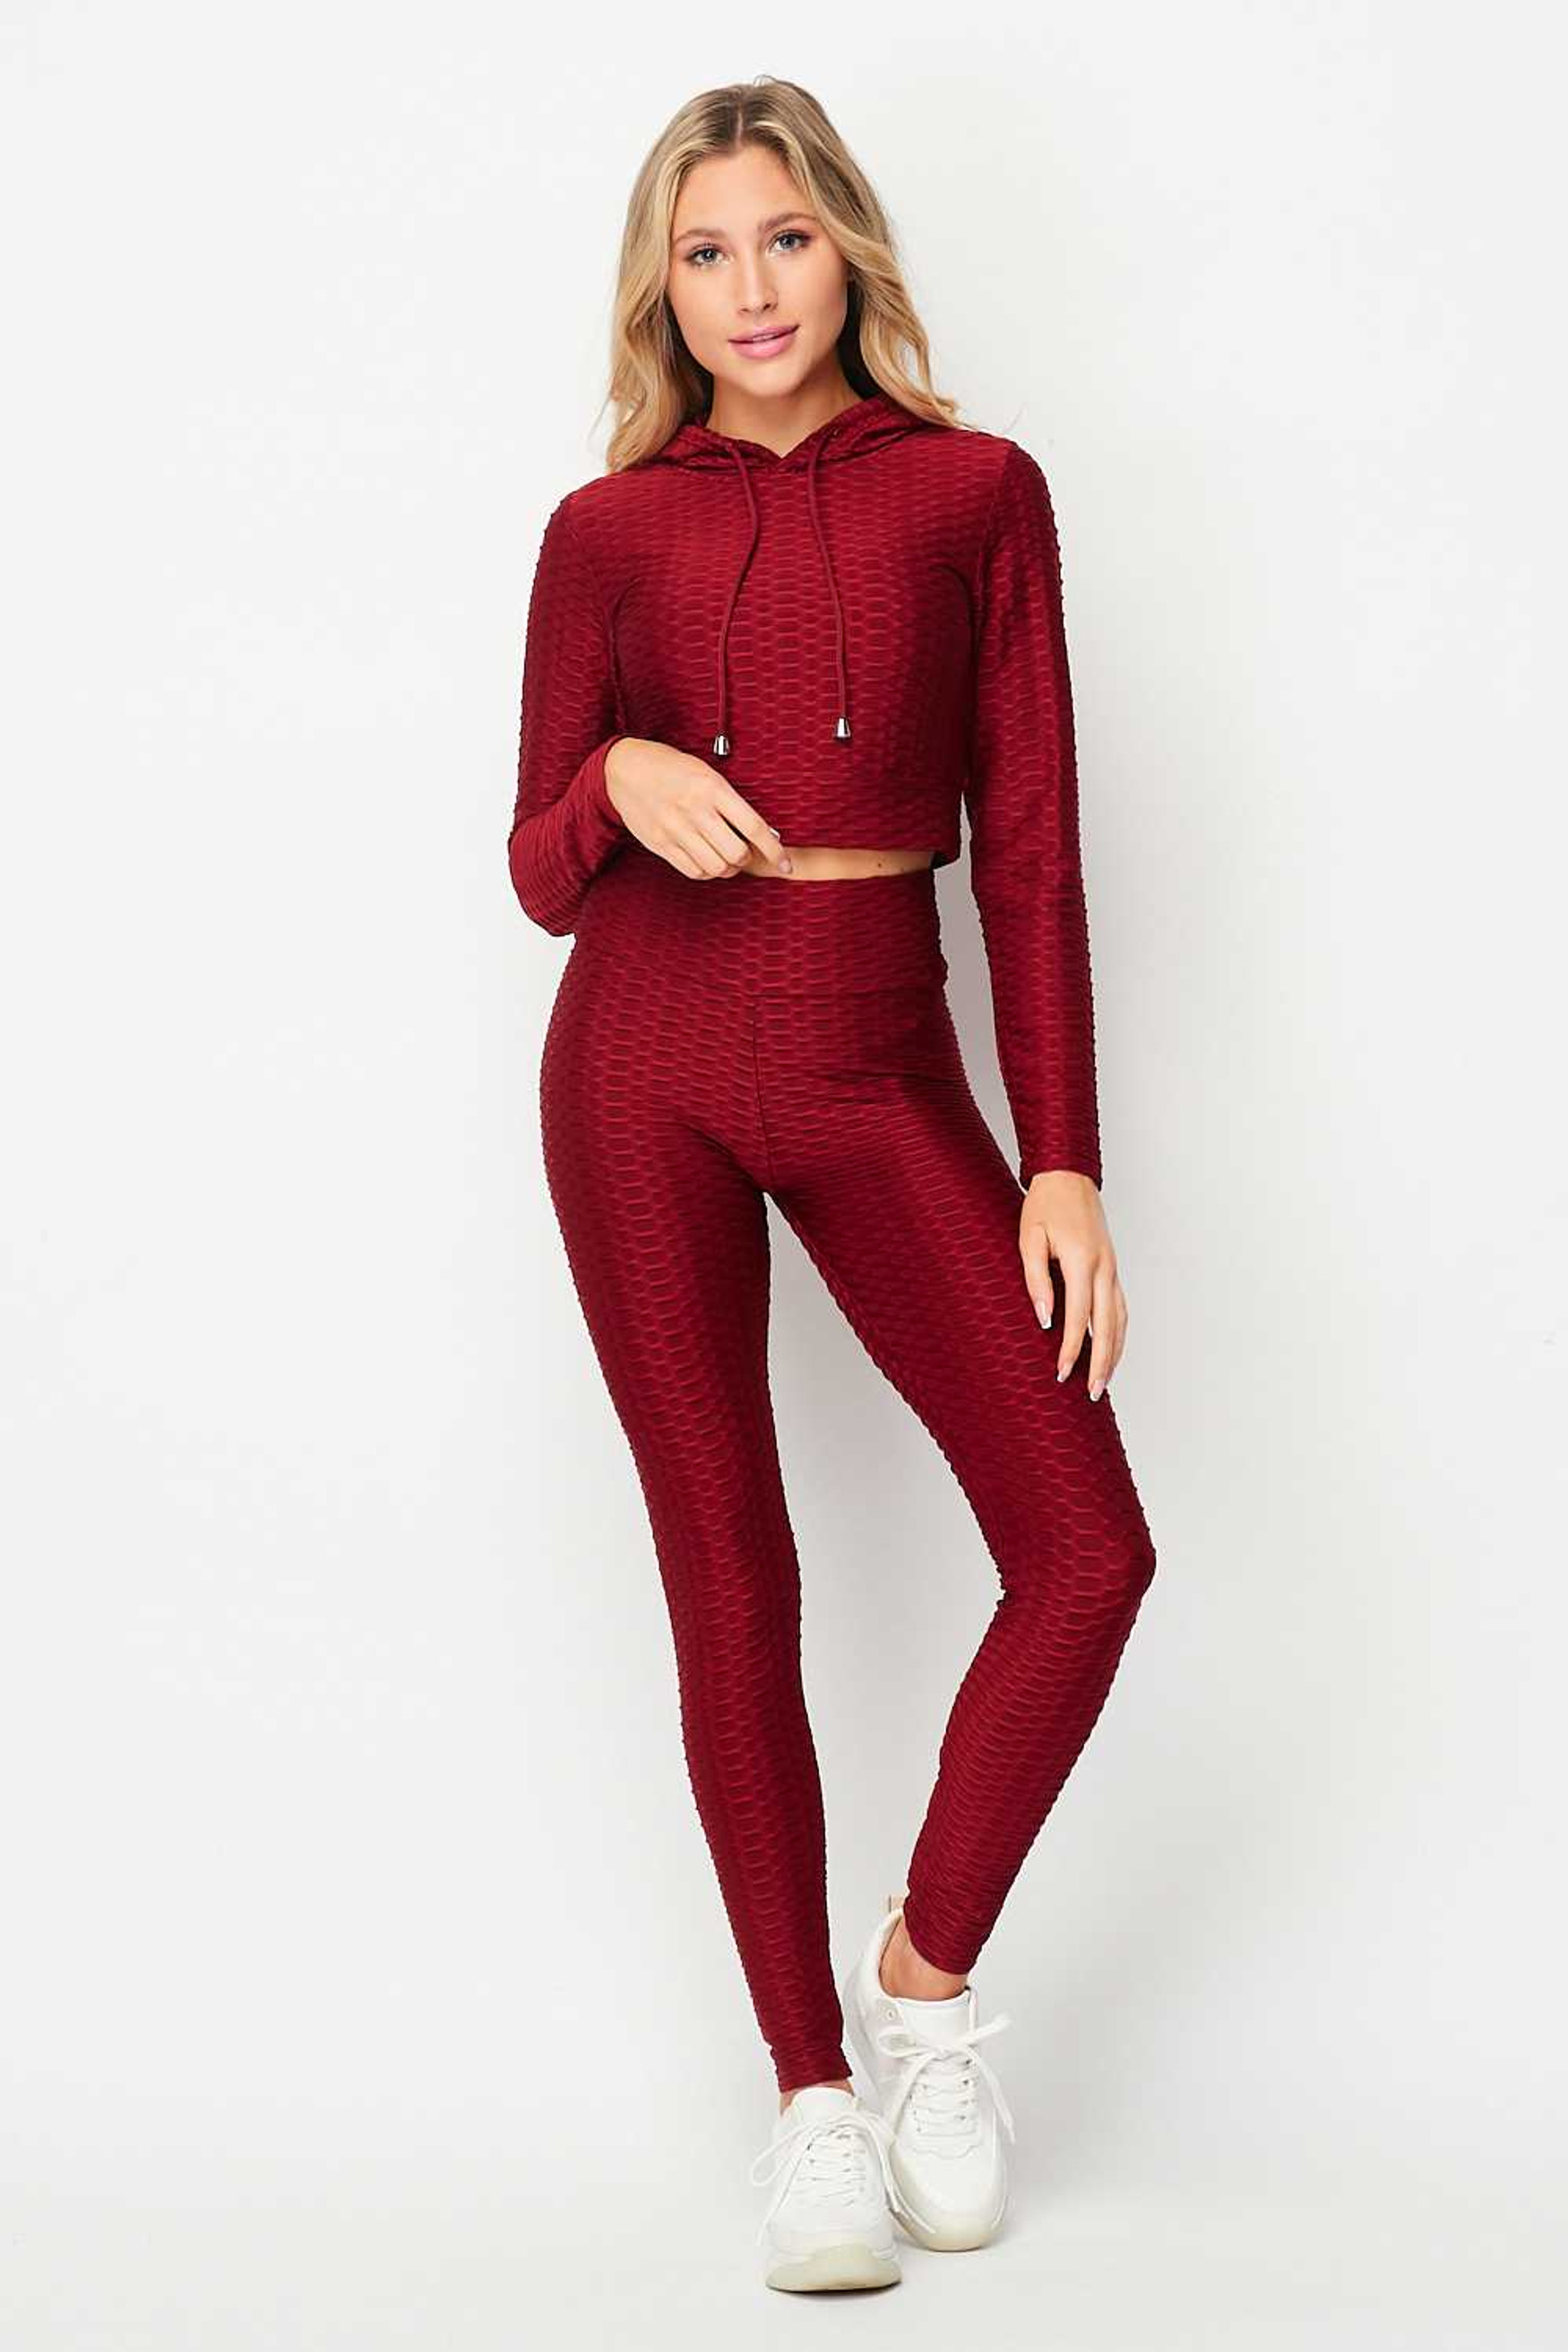 2 Piece Scrunch Butt Leggings and Cropped Hooded Jacket Set